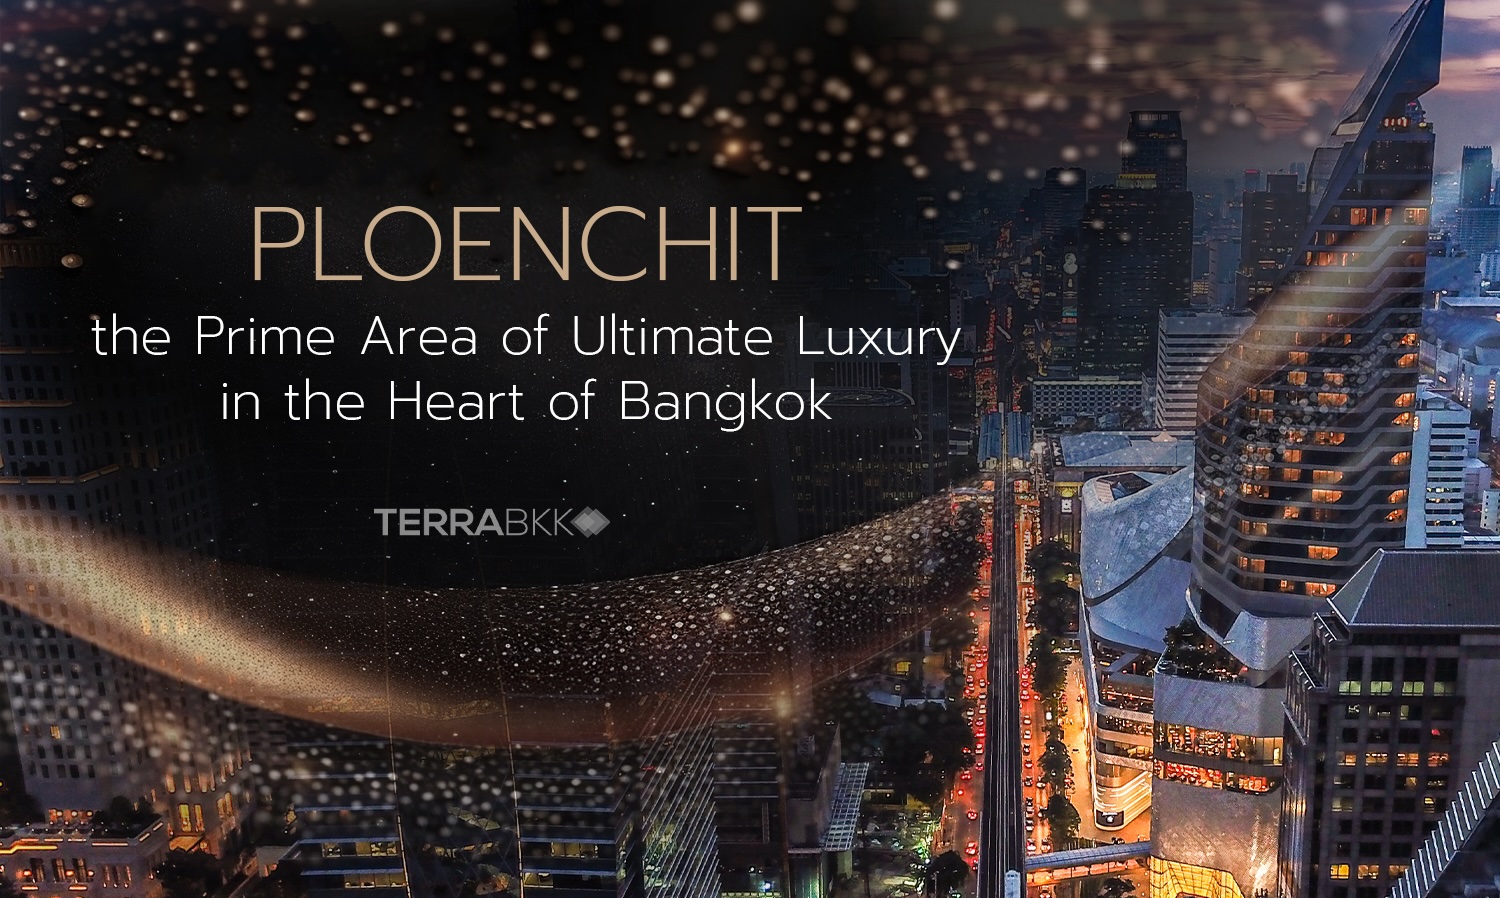 Ploenchit: the Prime Area of Ultimate Luxury in the Heart of Bangkok